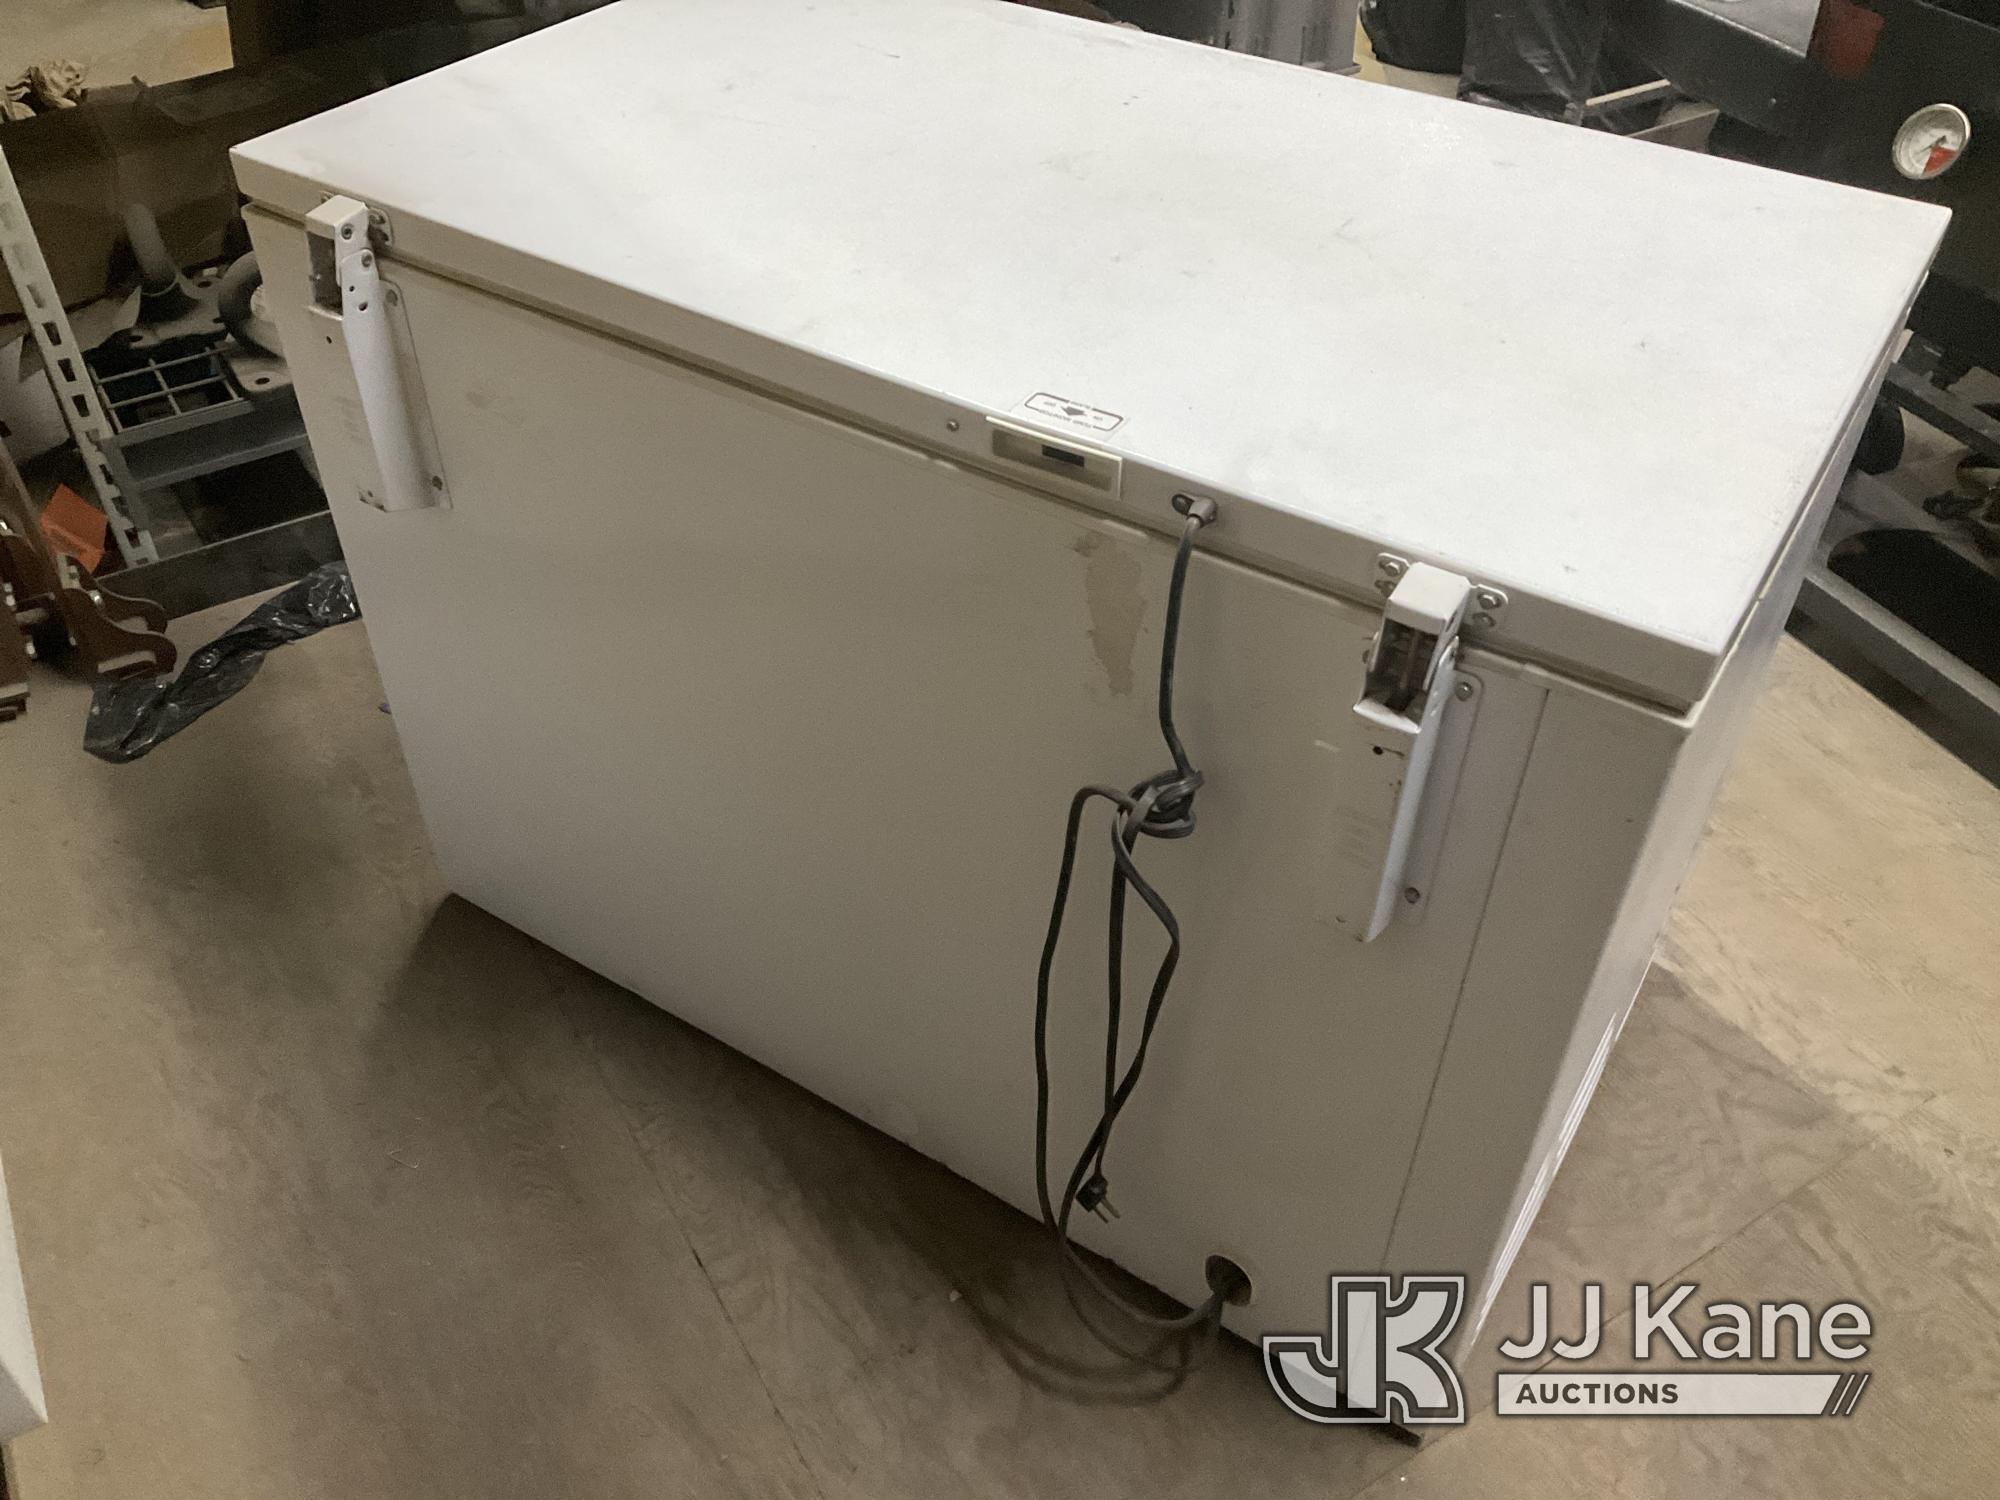 (Sedalia, CO) Qty 2 - General Electric chest freezers. Model number: FCM 15DPD WH Runs & Operates